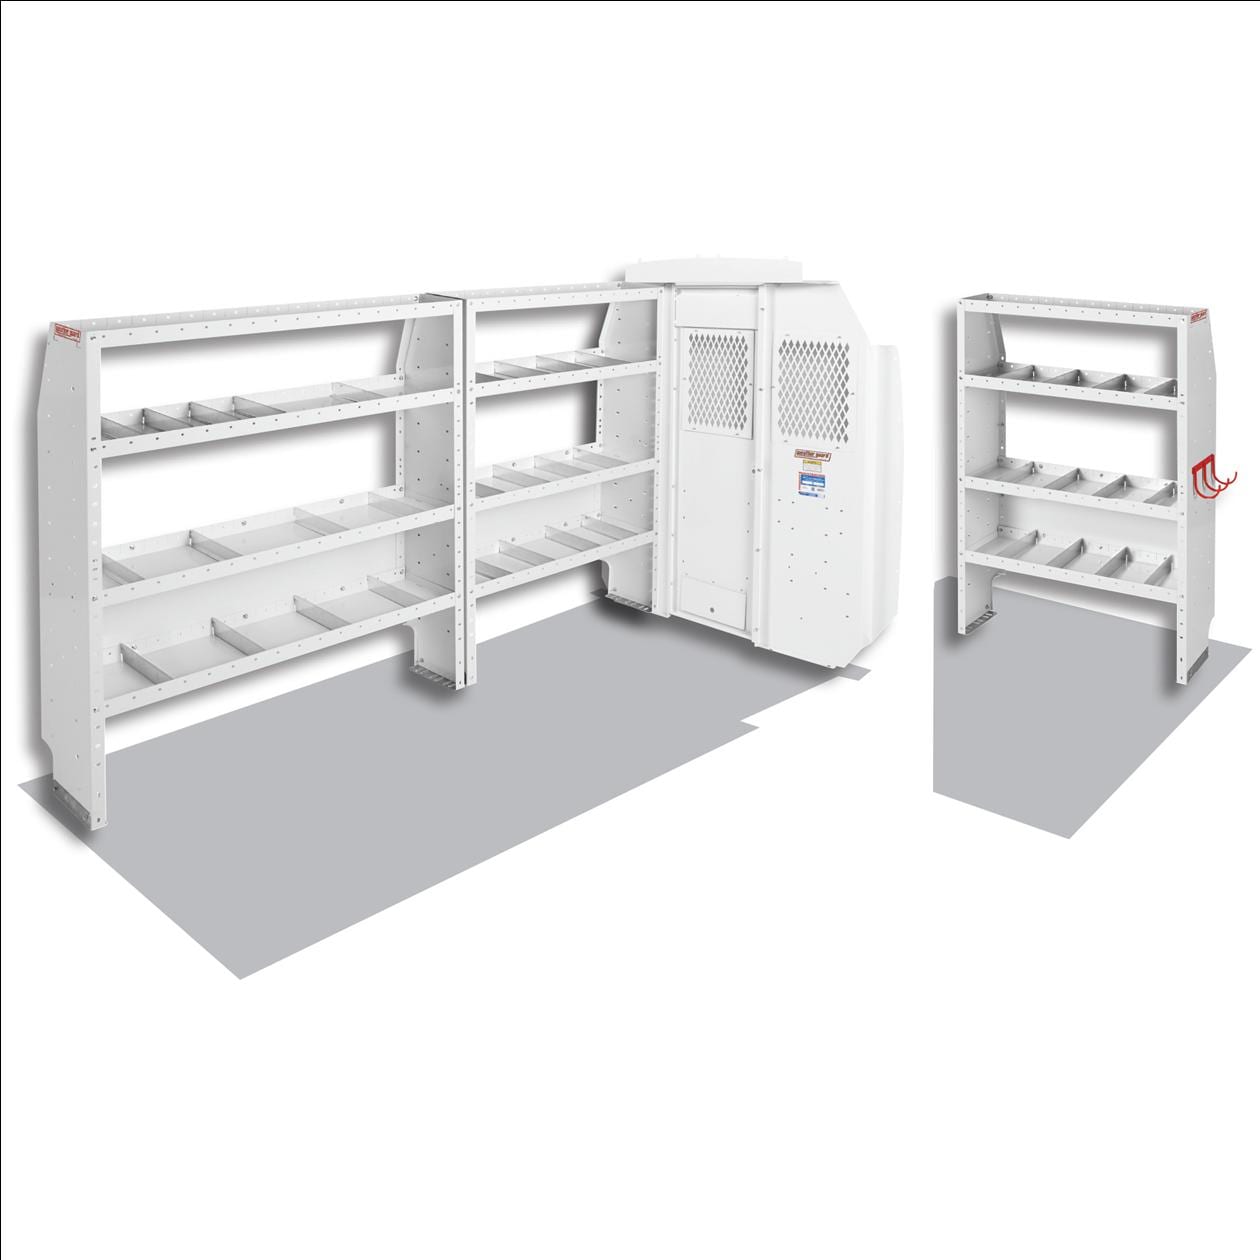 Medium Roof Ford Transit, Ford Transit Shelving Packages